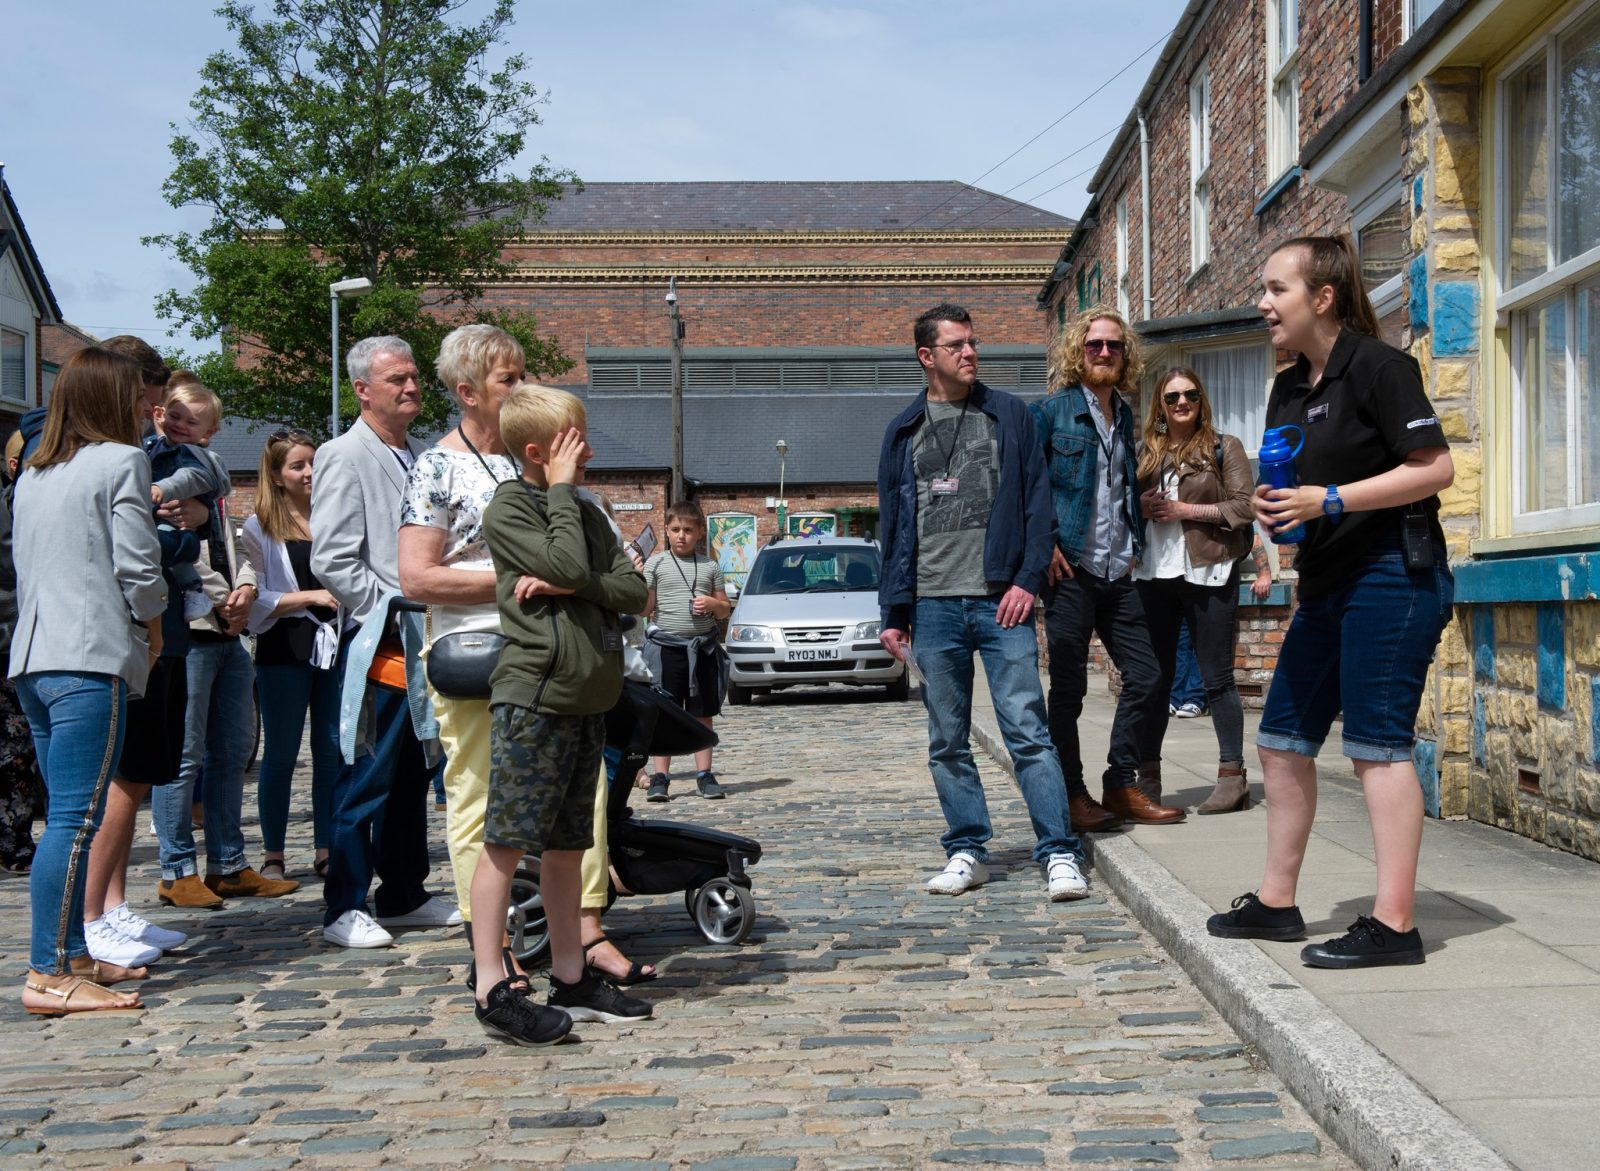 The famous Coronation Street tours are returning next month and you can now book tickets, The Manc